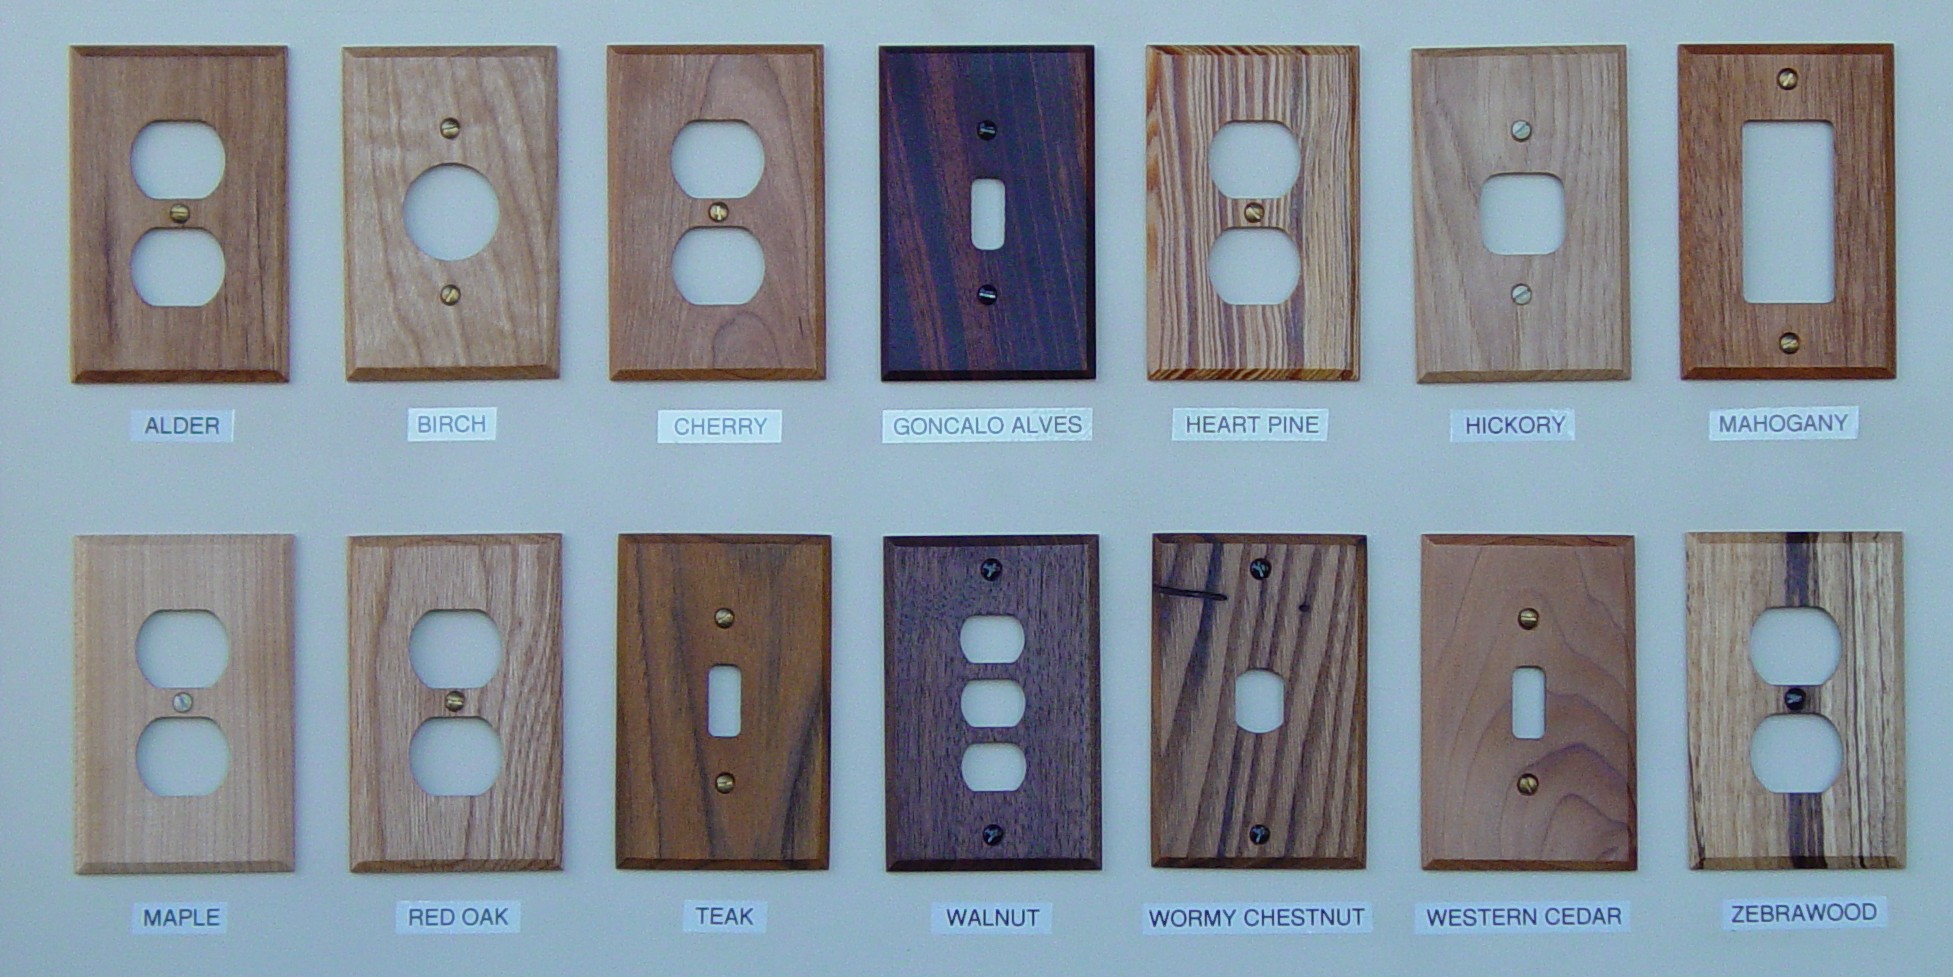 We sell wood switch plates, wood wall plates and log wood wall